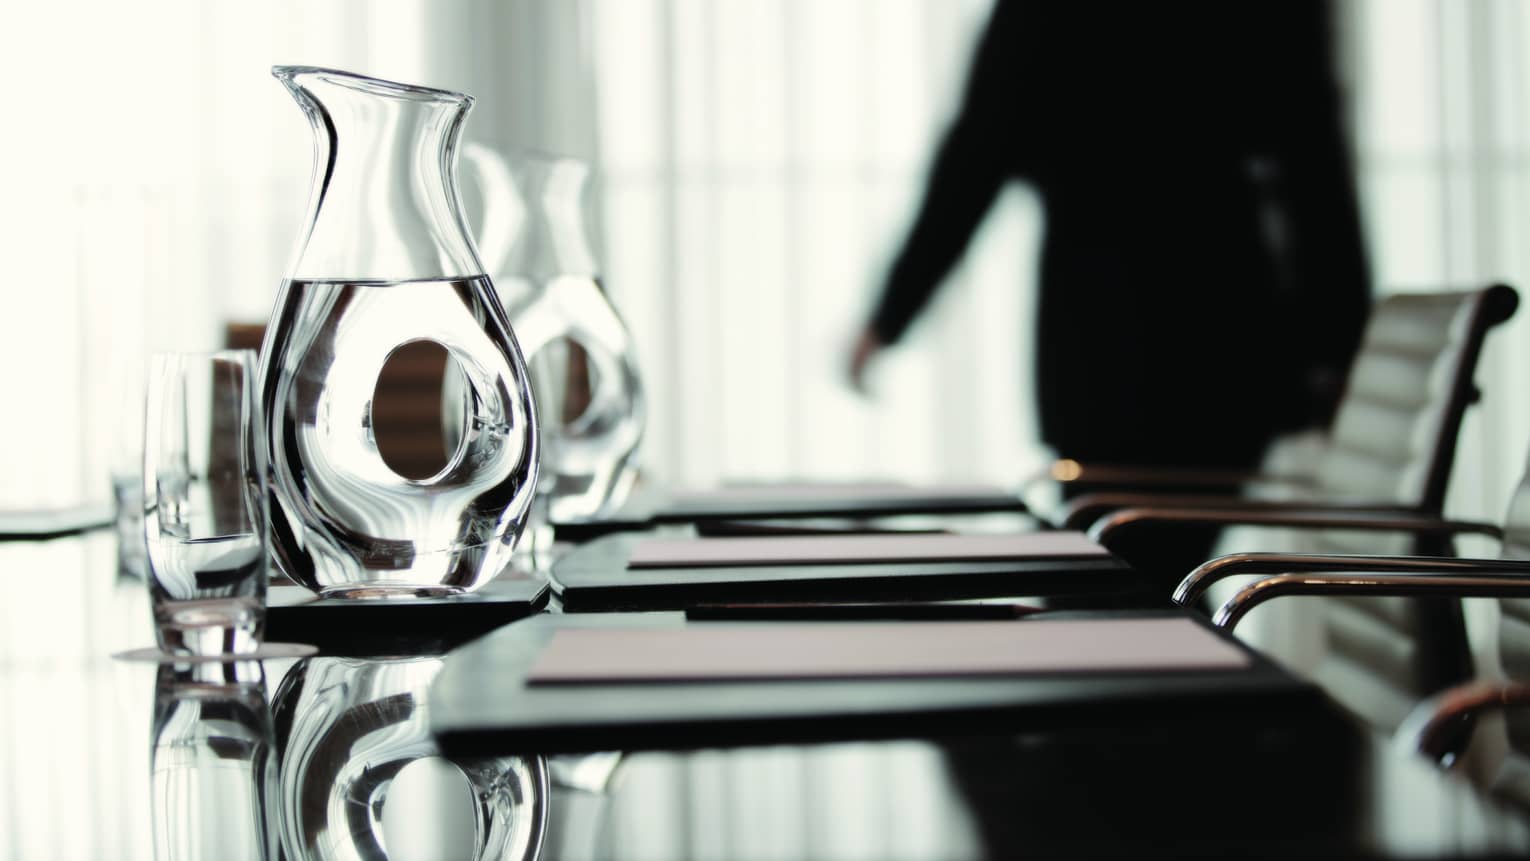 Person wearing business suit walks behind meeting table with agendas, glass water jugs